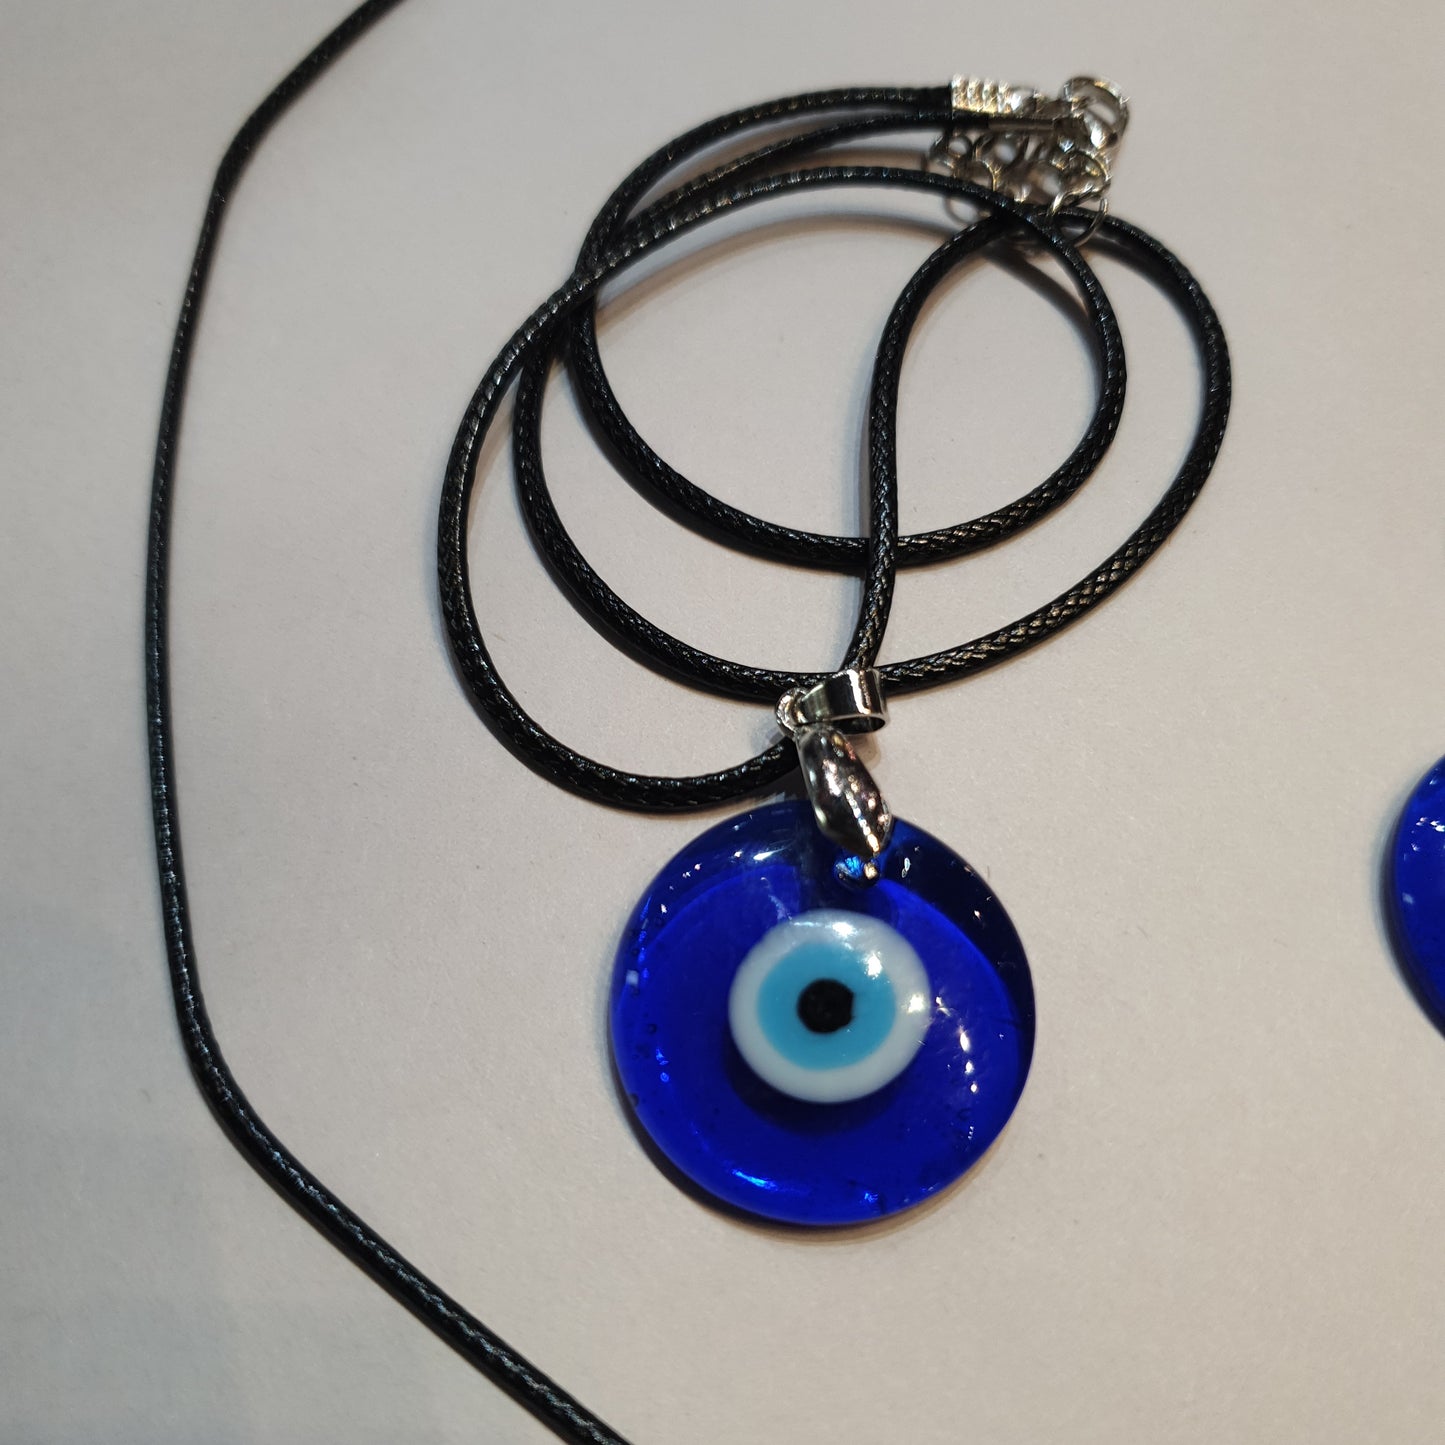 Evil Eye Necklace round with Waxed Cord - Rivendell Shop